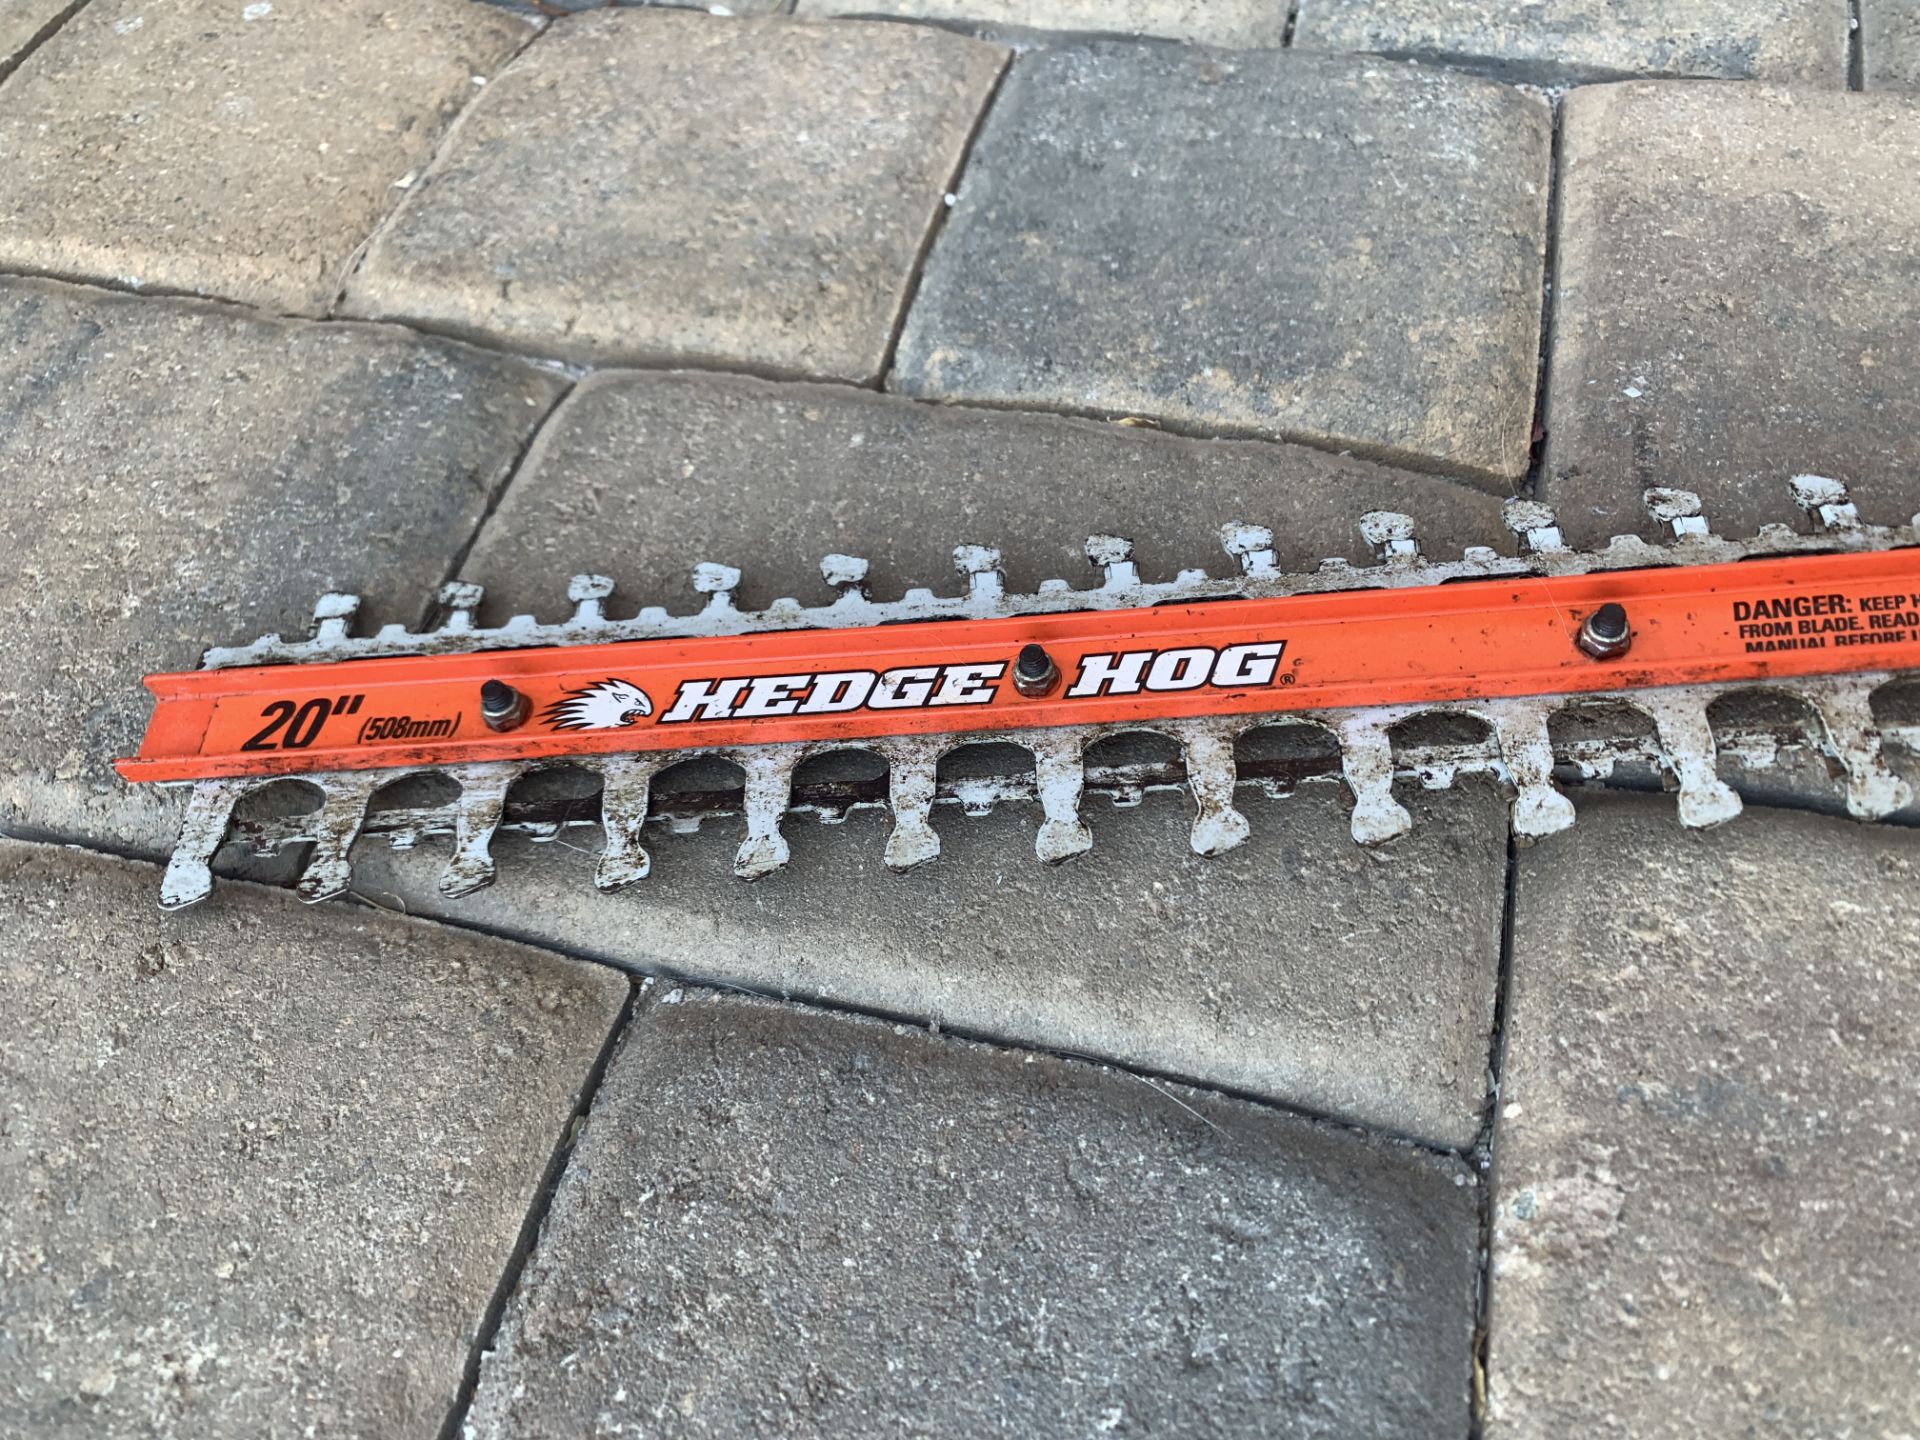 20" BLACK AND DECKER HEDGE HOG WORKS PERFECT - Image 2 of 2